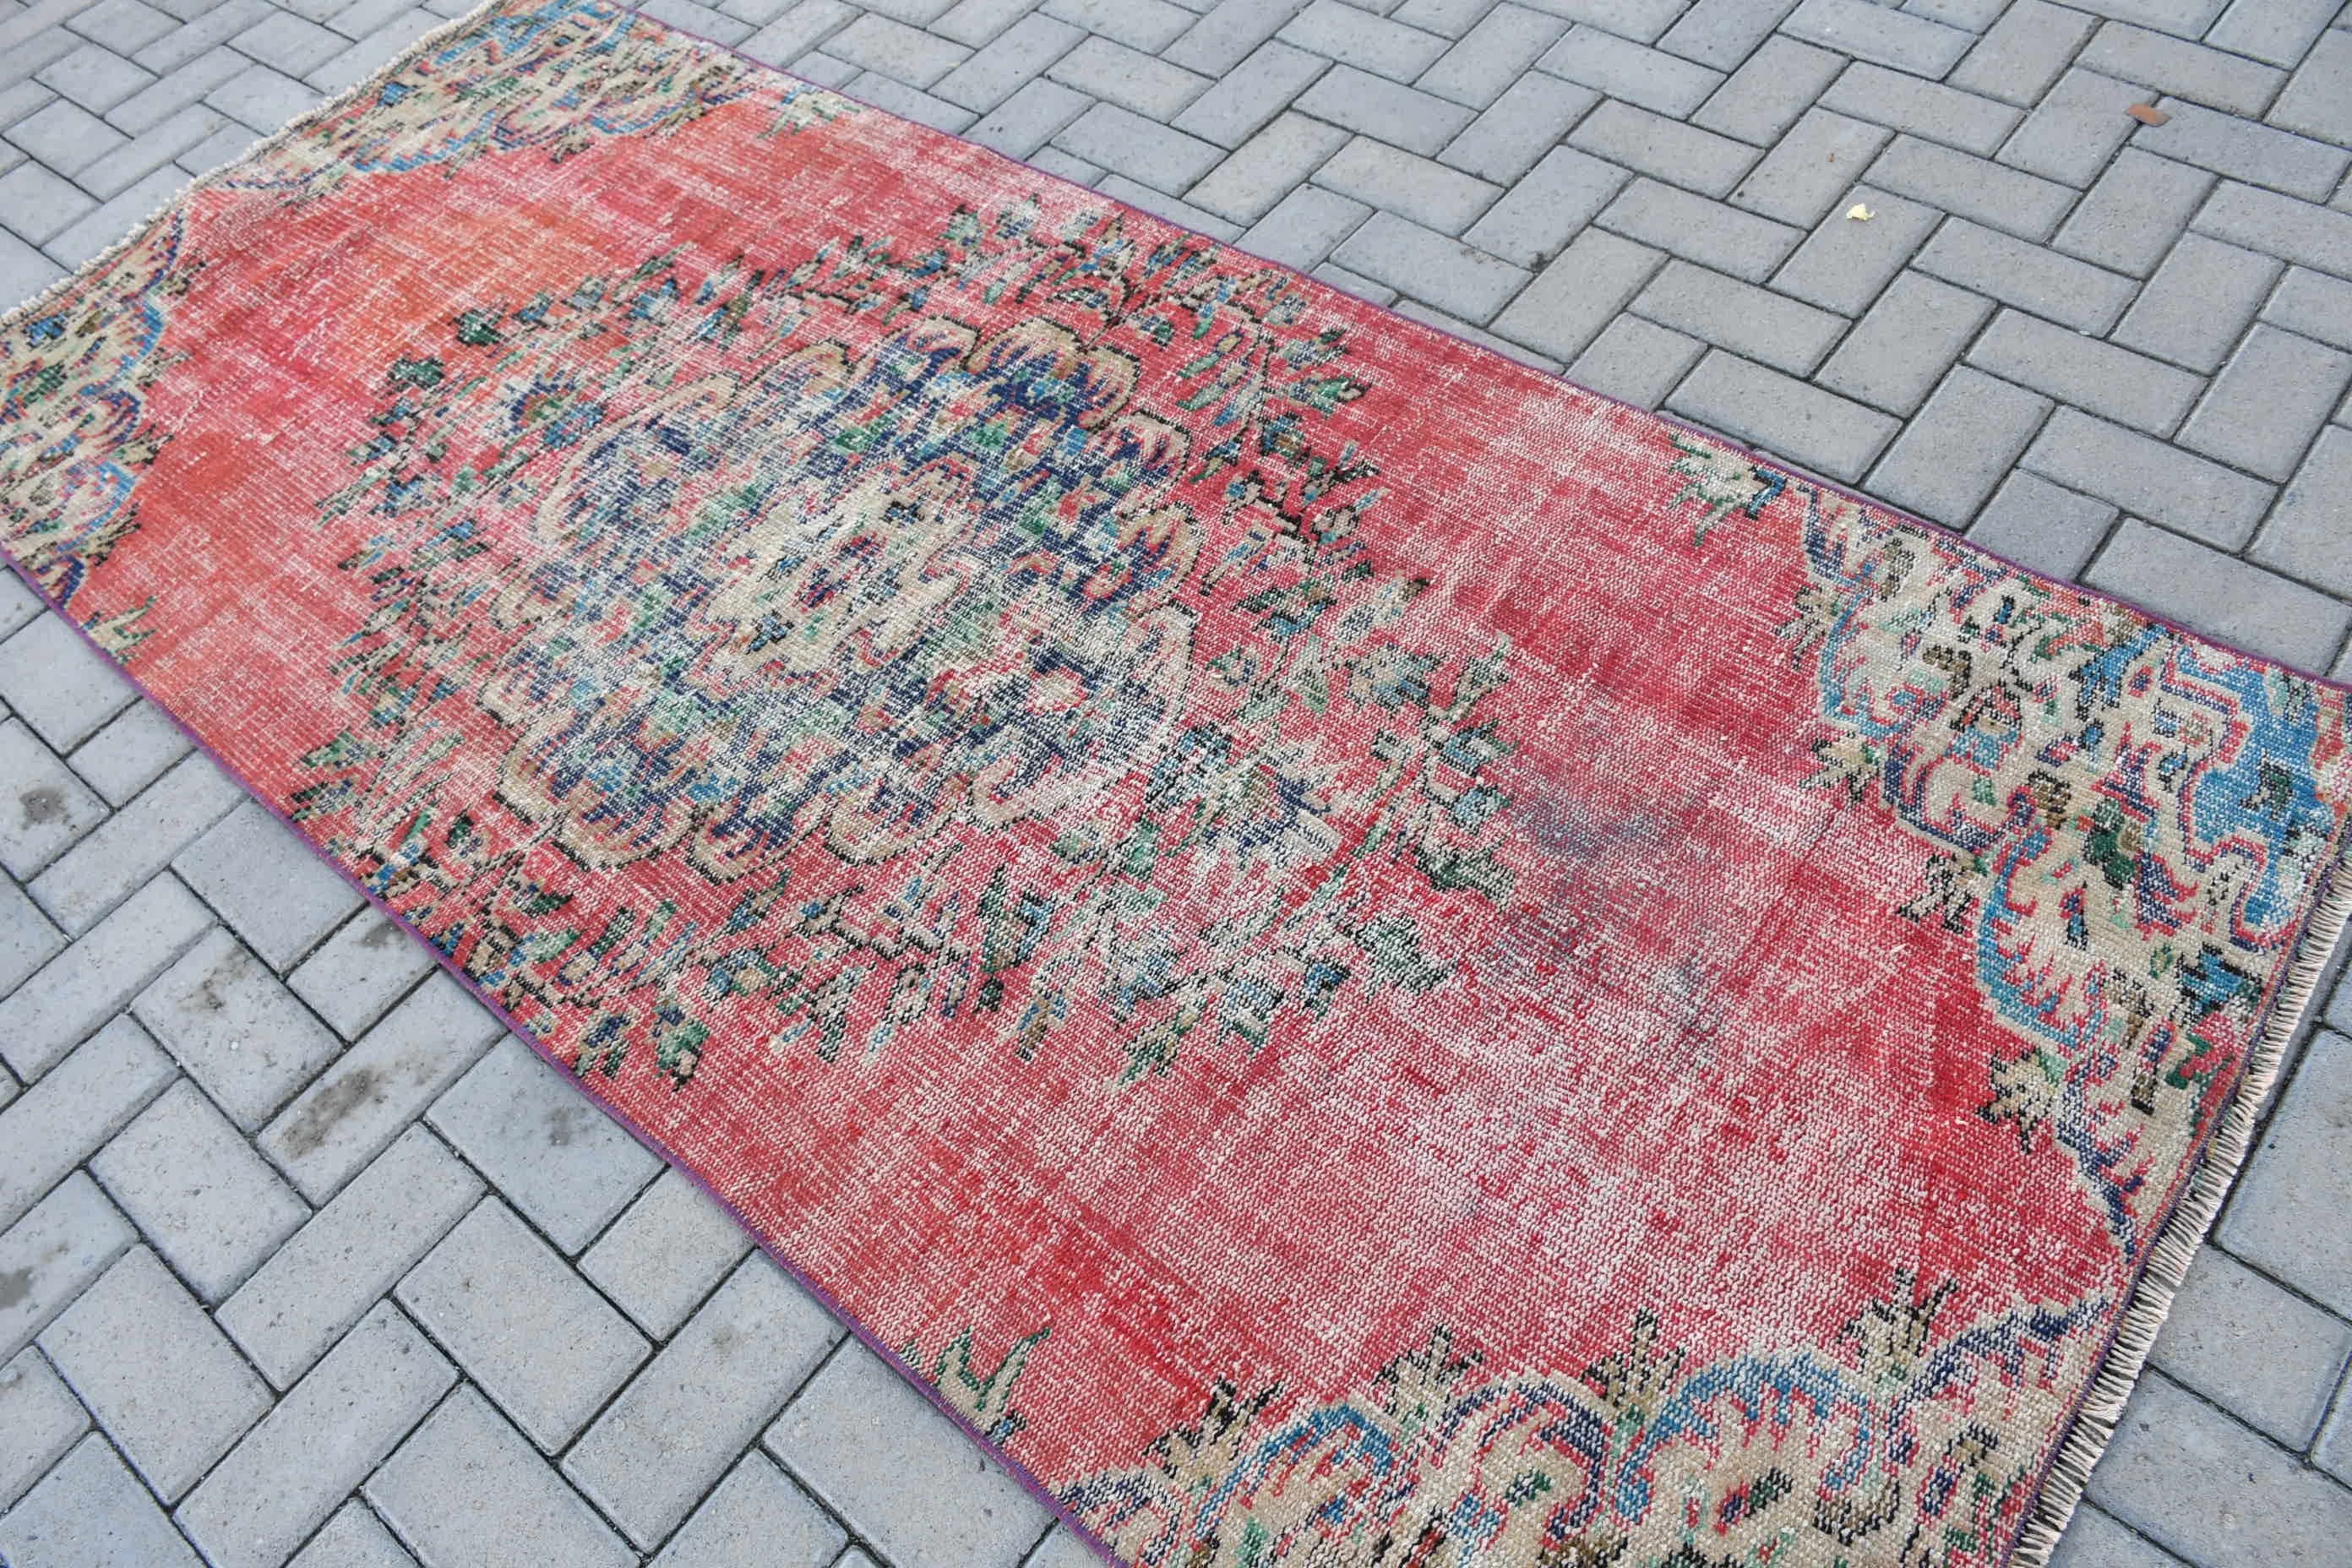 Vintage Decor Rugs, Antique Rug, 3.4x7.9 ft Area Rugs, Turkish Rug, Moroccan Rugs, Vintage Rug, Rugs for Area, Bedroom Rug, Red Cool Rug